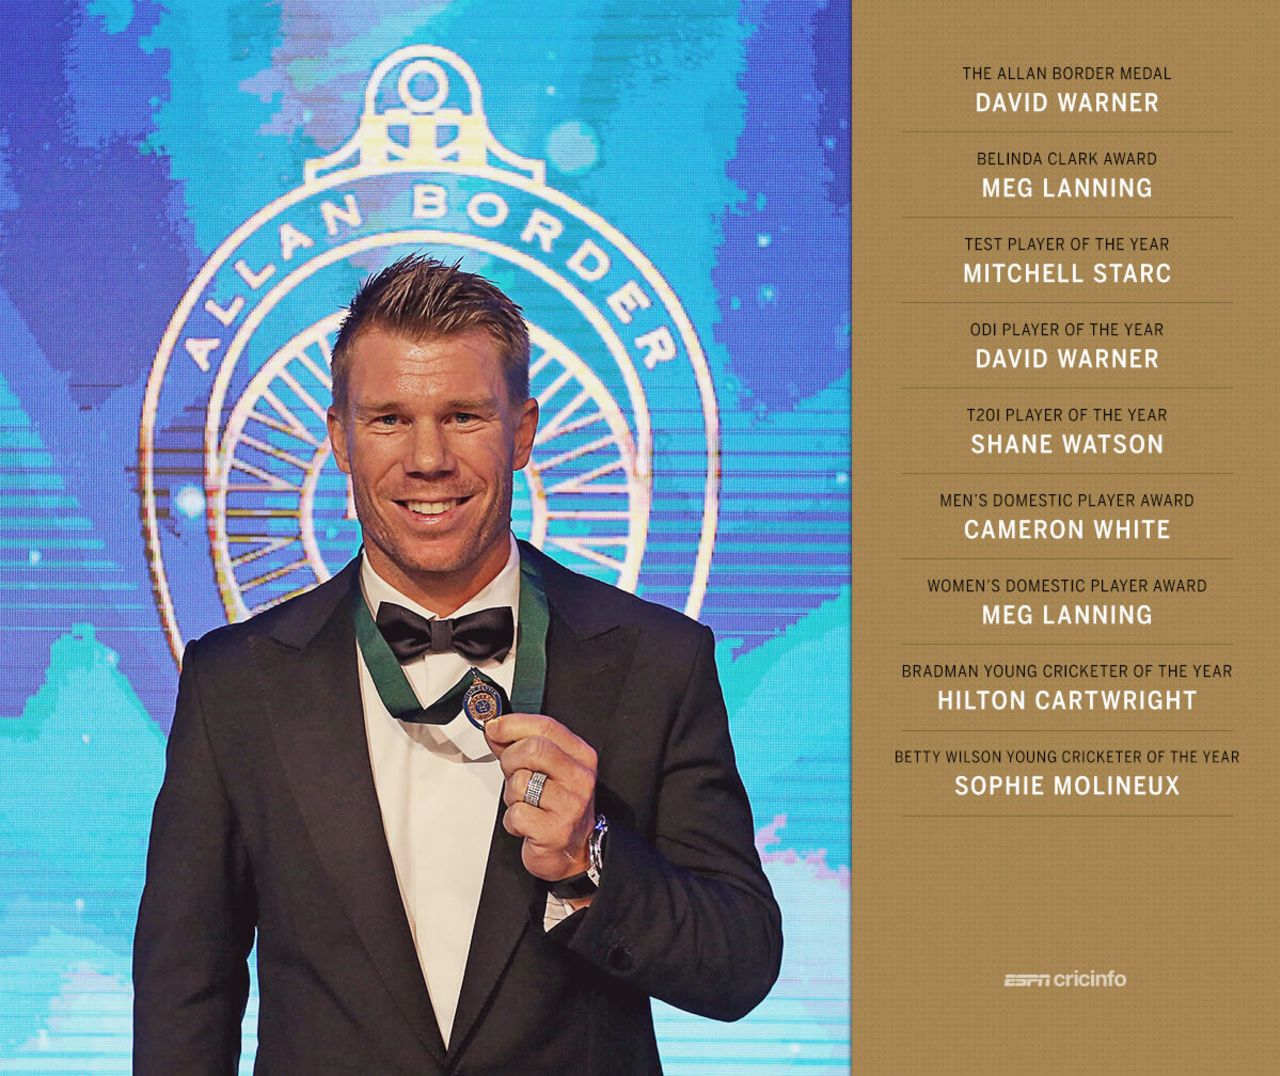 The winners at the 2017 Allan Border Medal awards ceremony, Sydney, January 23, 2017